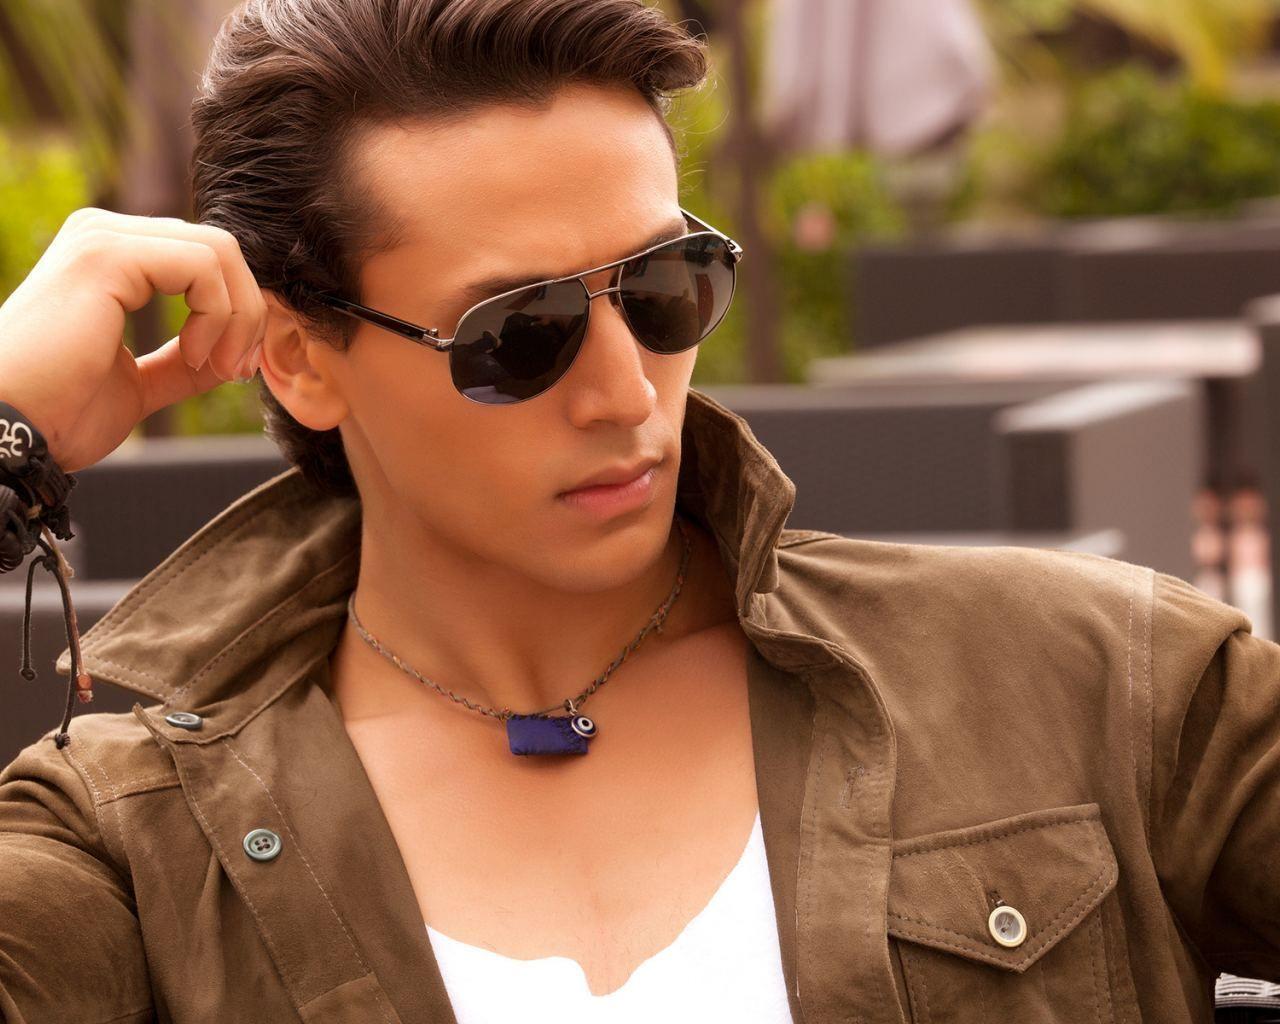 Baaghi Tiger Shroff x 1024 Preview HD Wallpaper for mobile and desktop Wallpaper HD, wallpaper HD 1080p, wallpaper full h. Tiger shroff, Tiger love, Tiger